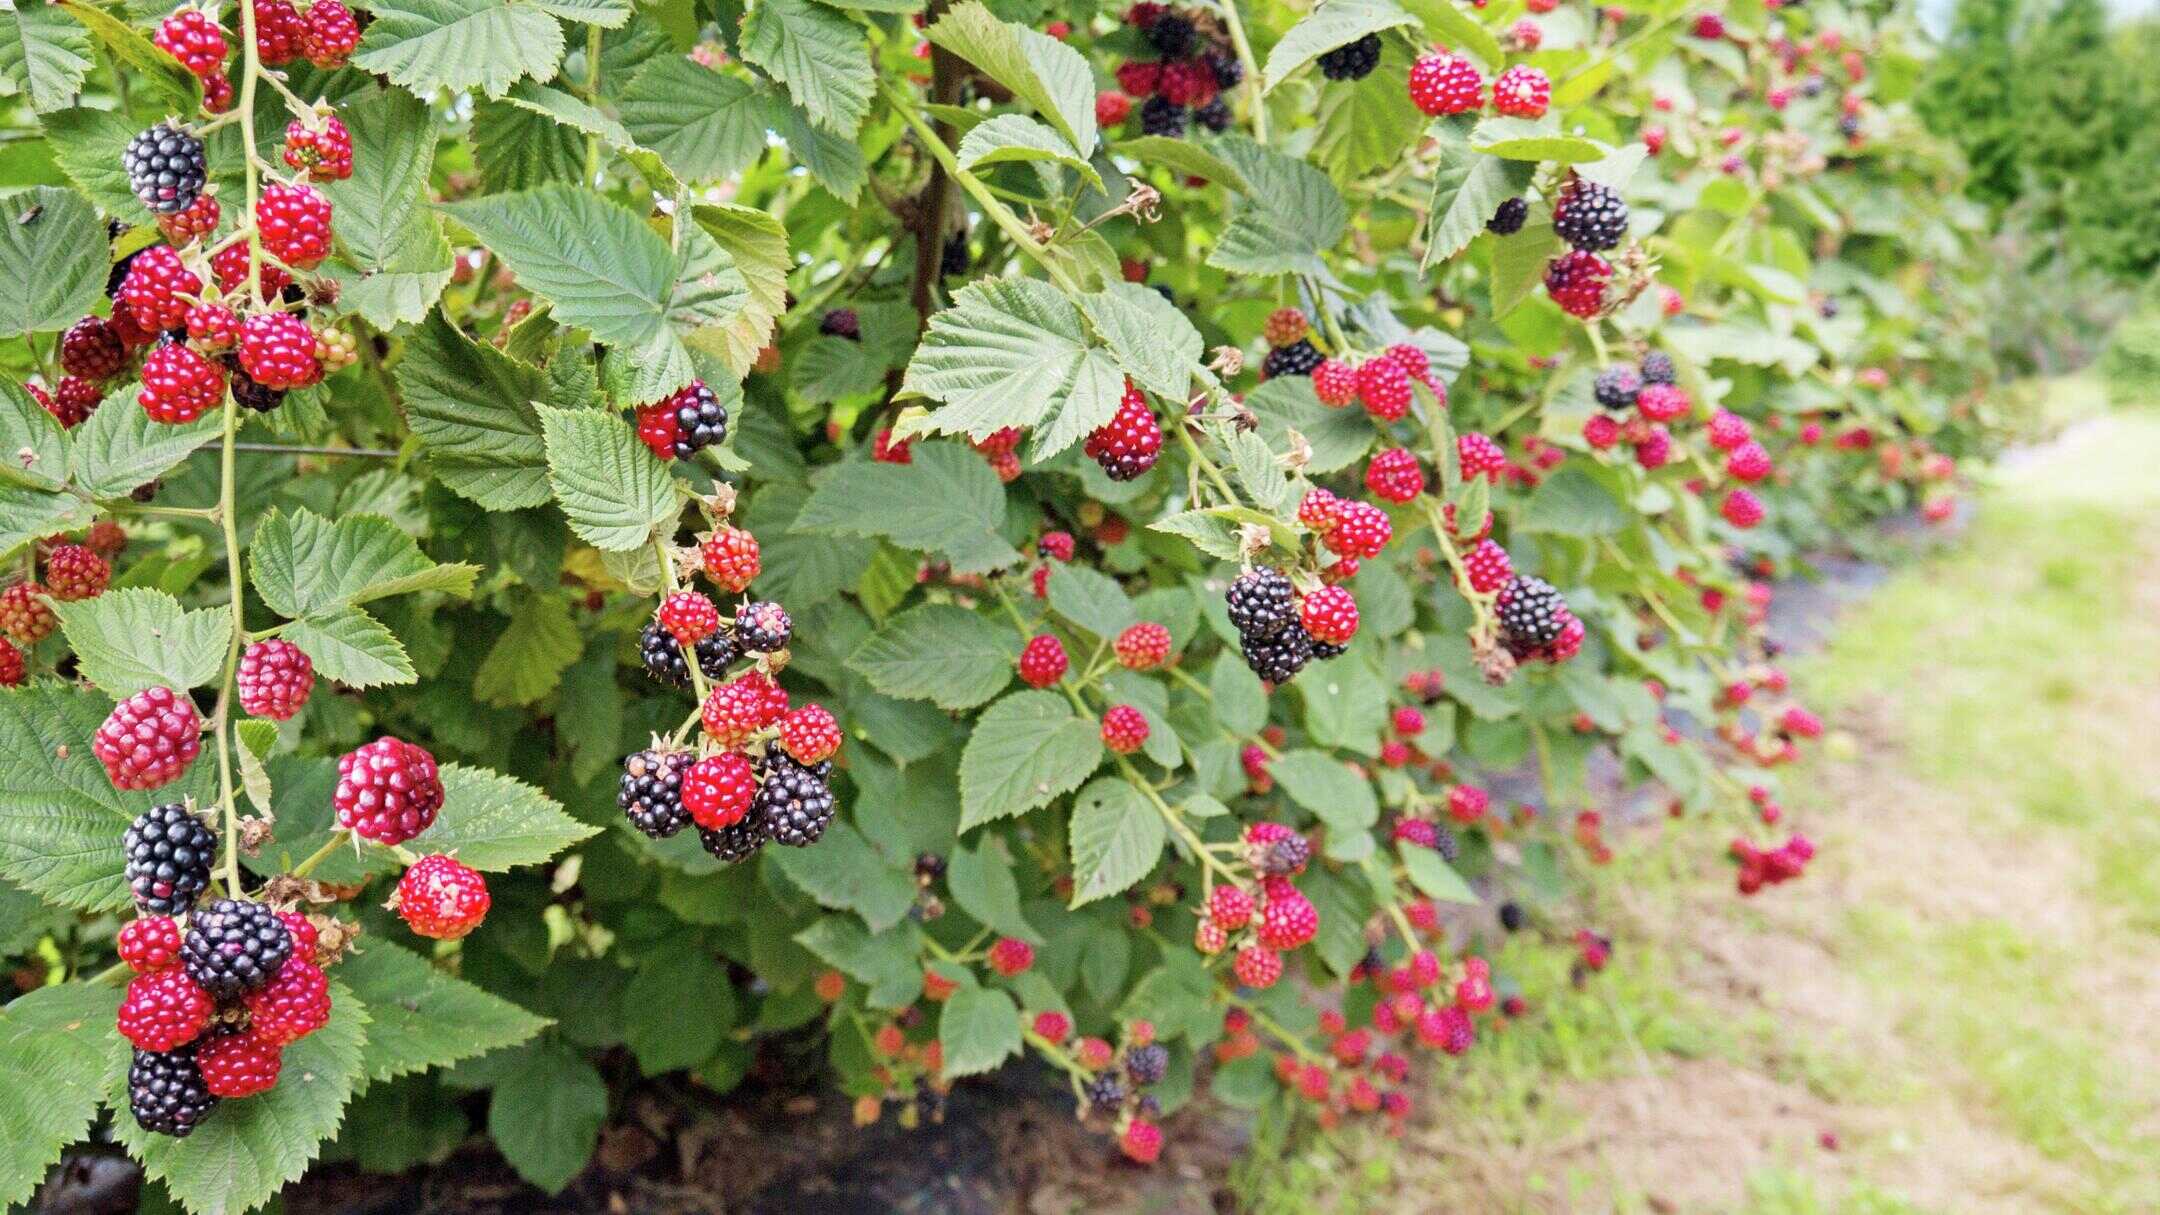 How To Grow Blackberries From Seed